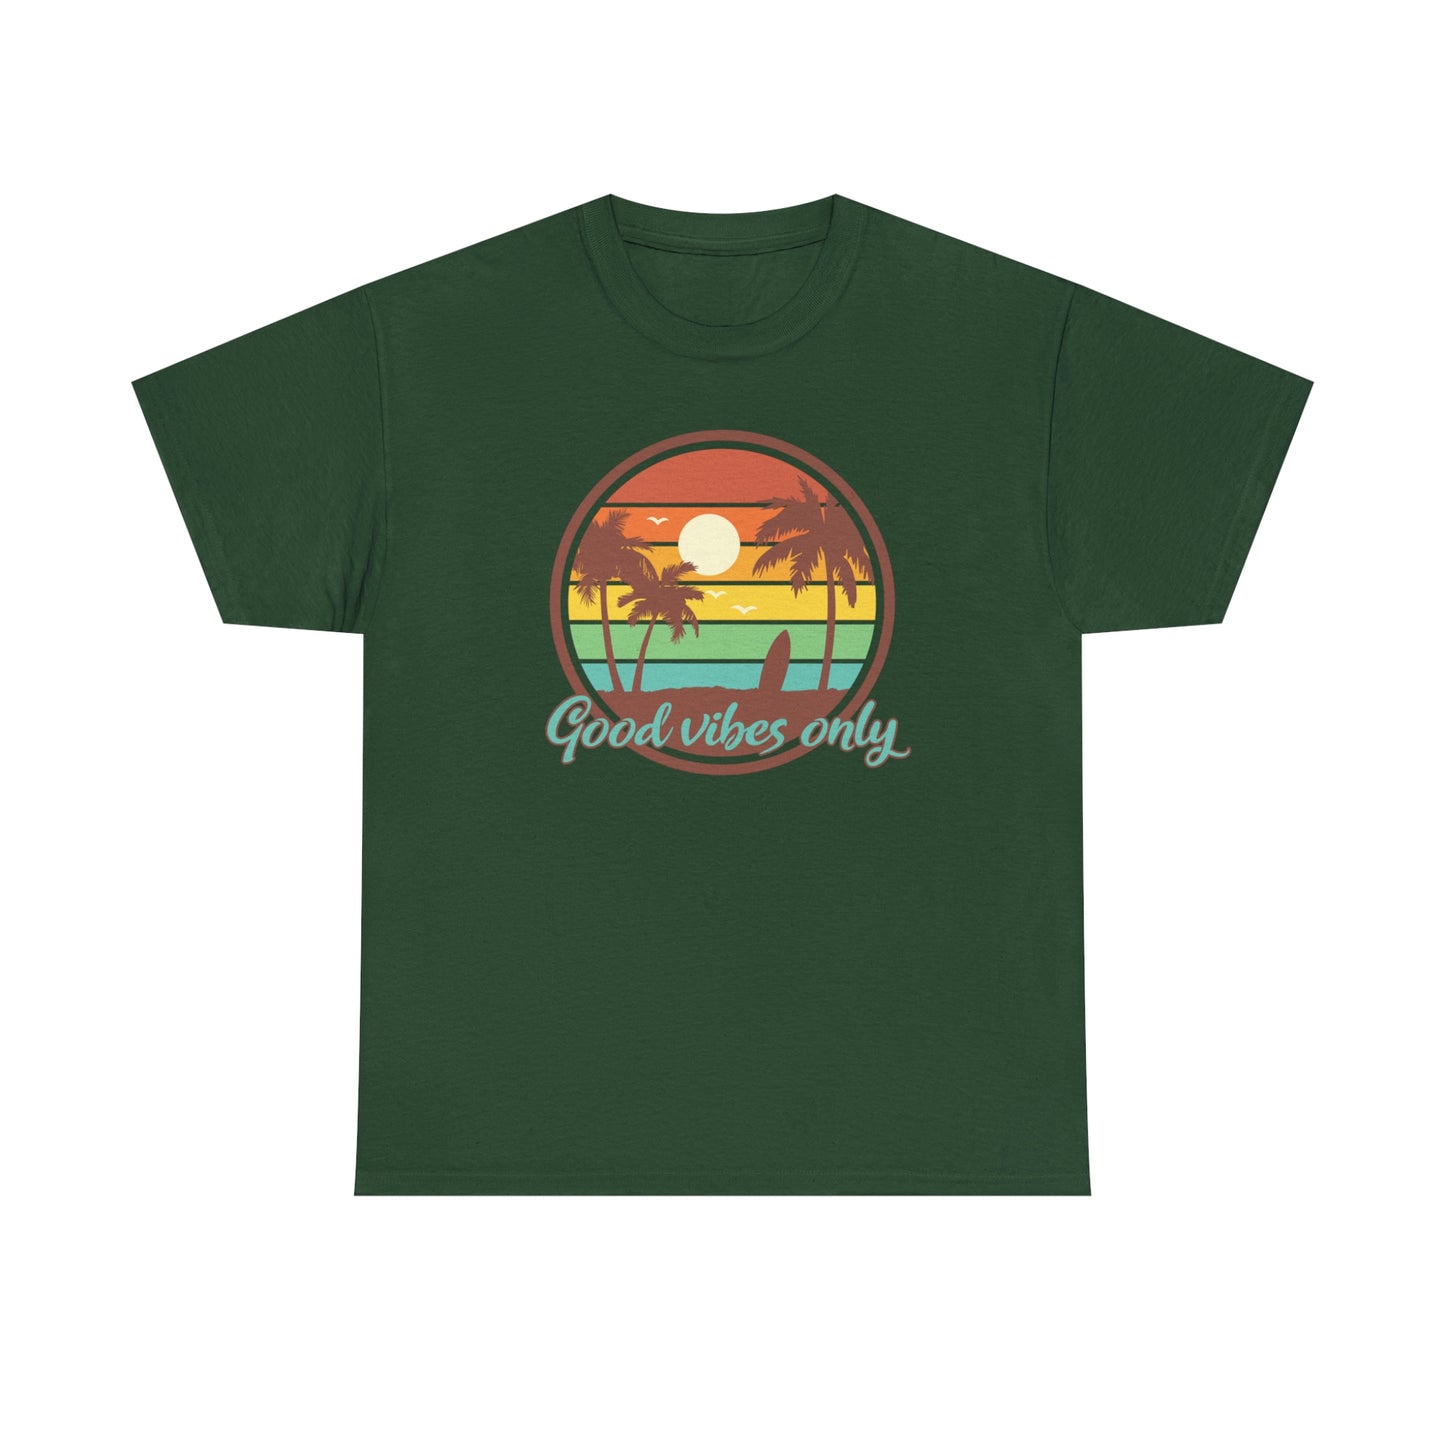 Good Vibes T- Shirt For Summer Vibes TShirt For Beach Scene T Shirt With Sunset T-Shirt Inspirational TShirt For Vacation Tee